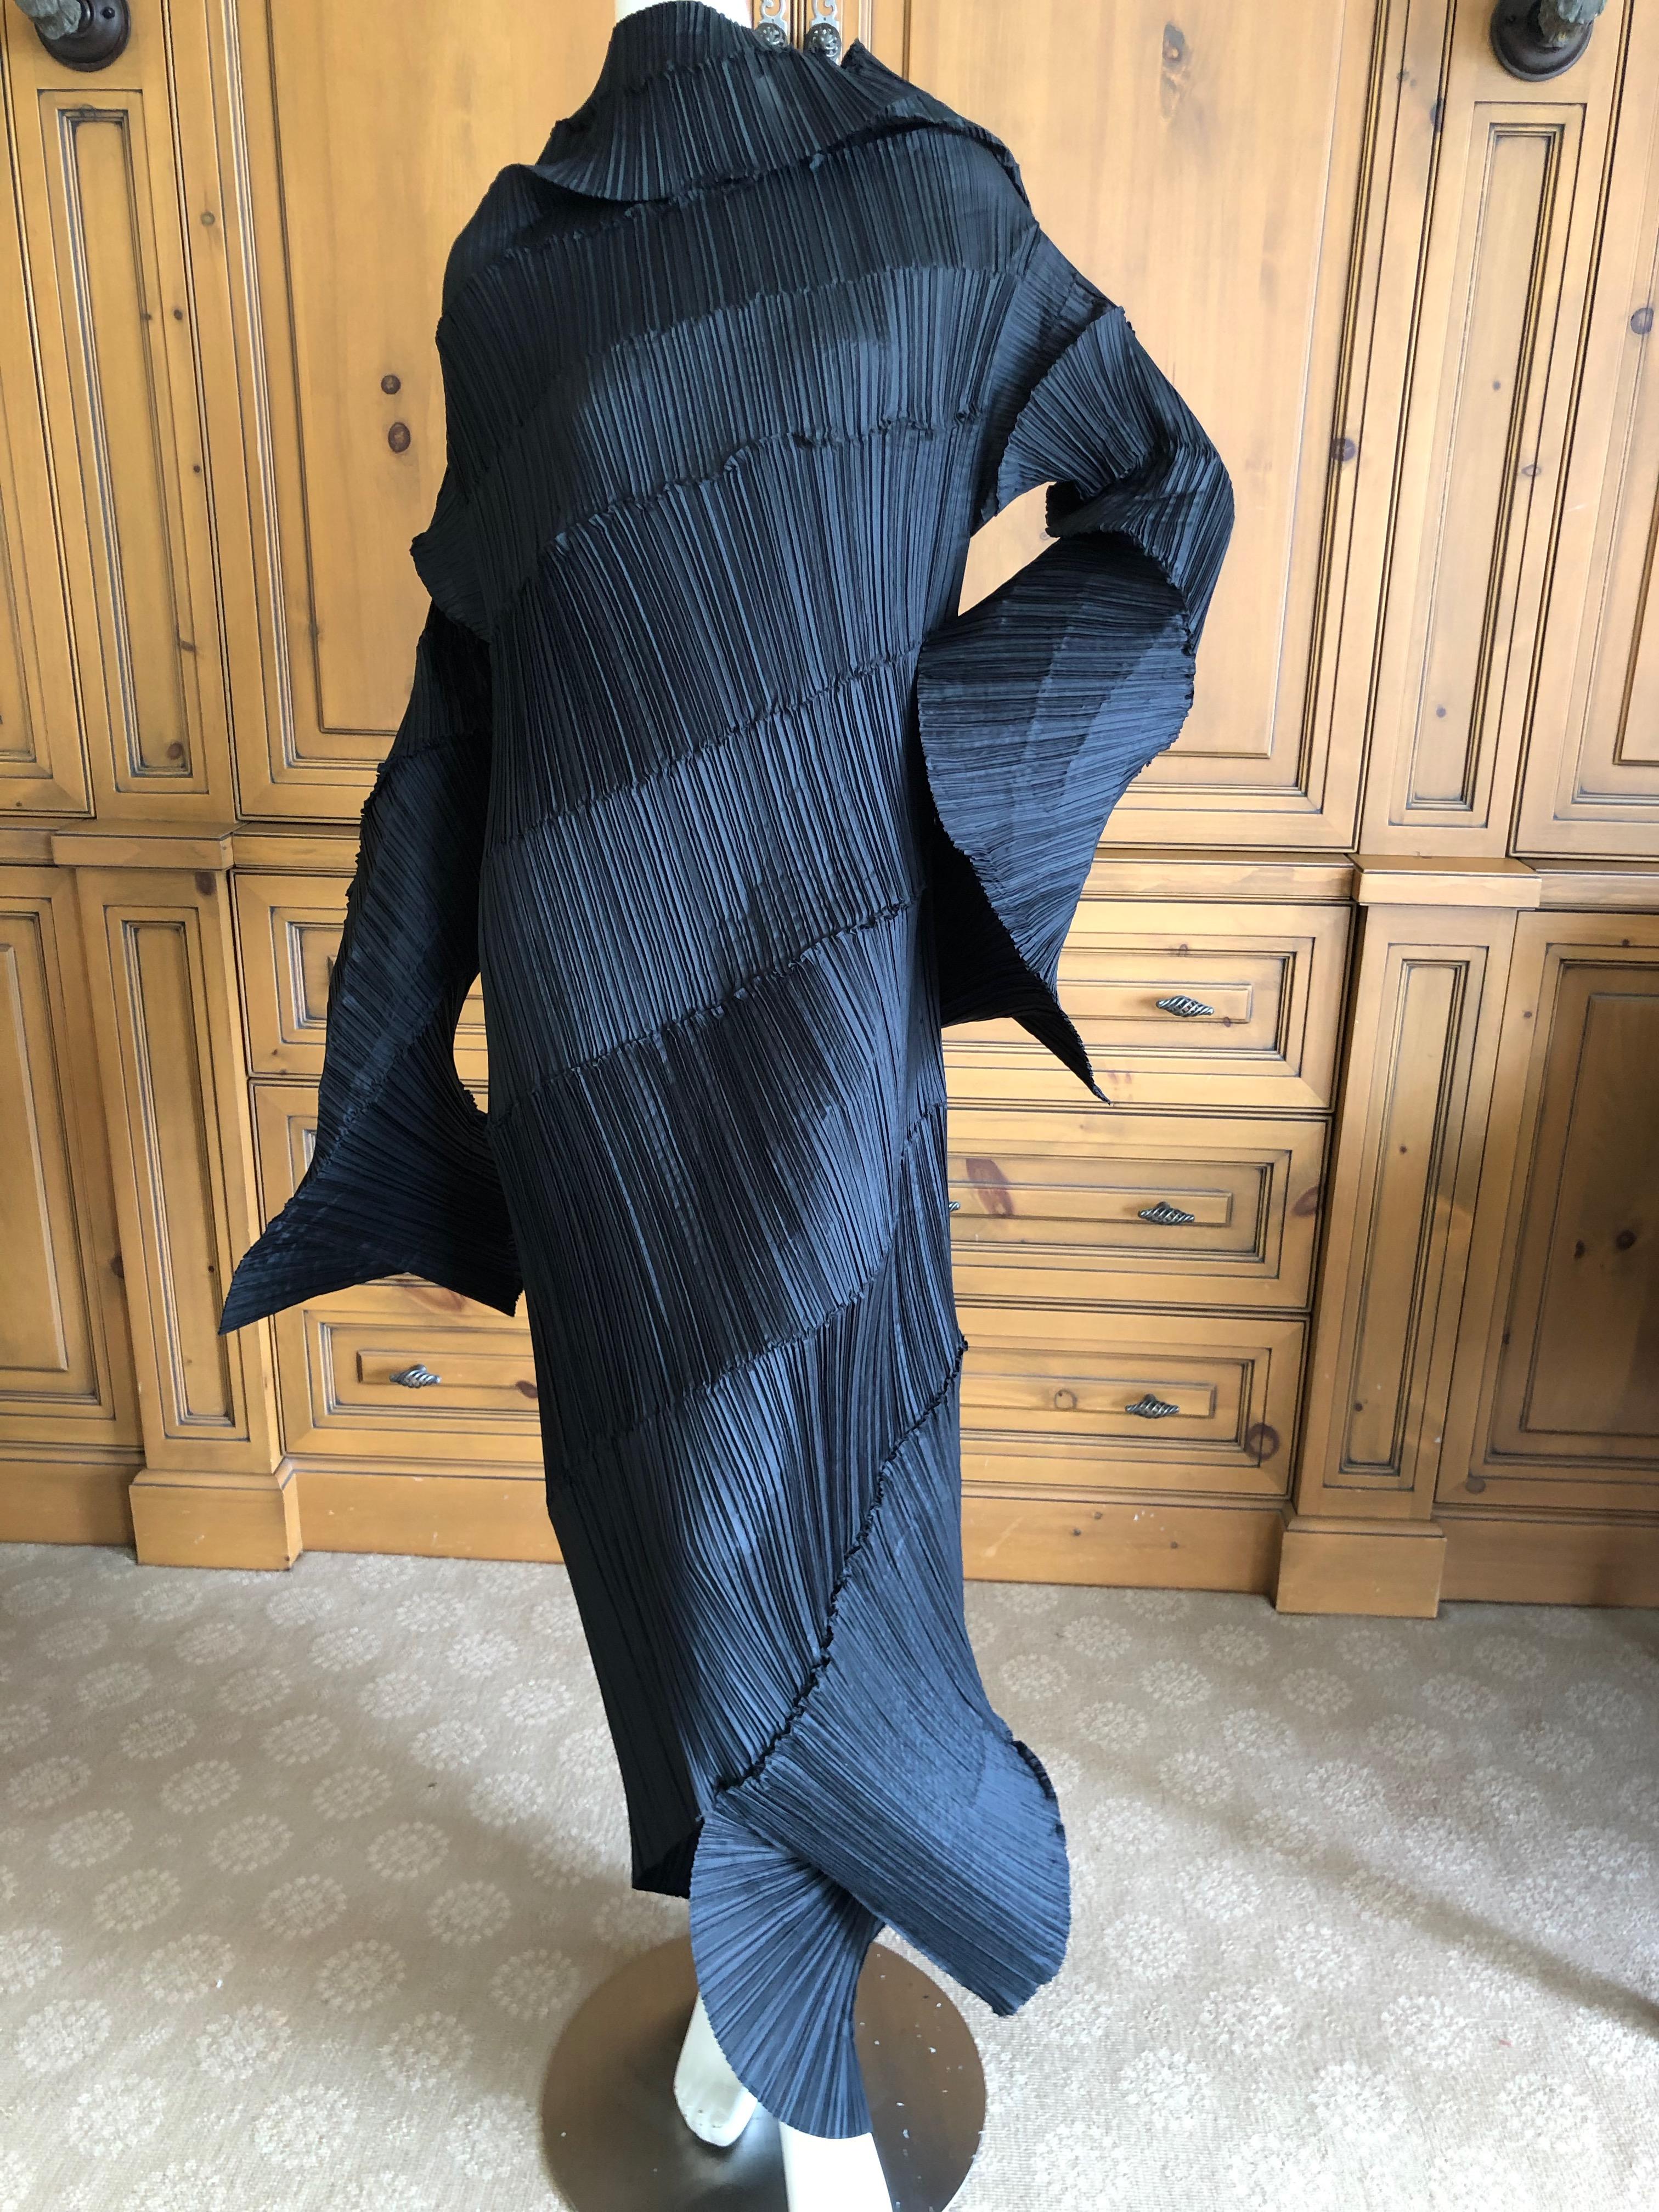 Issey Miyake spiraling pleated oversize black dress.
This is amazing, must be seen to be appreciated. It is very sculptural and extremely overscale
One size fits all the bust measures 44